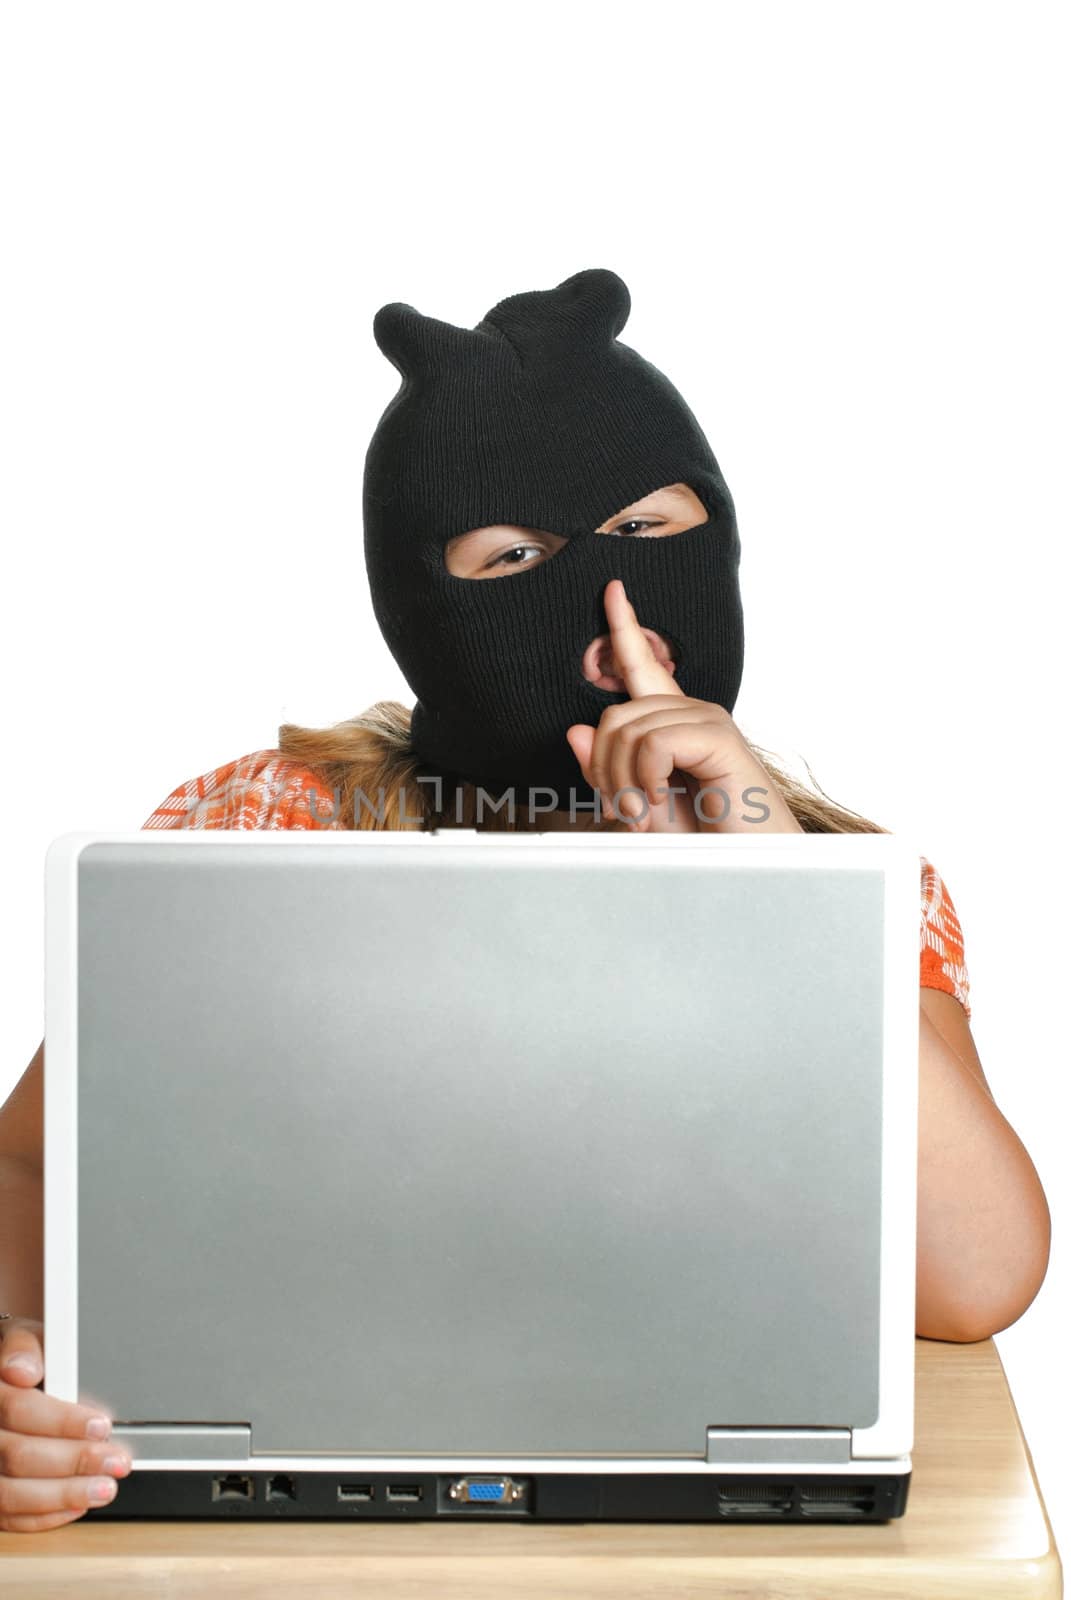 A young child hacker is working on a computer saying shhh, isolated against a white background.